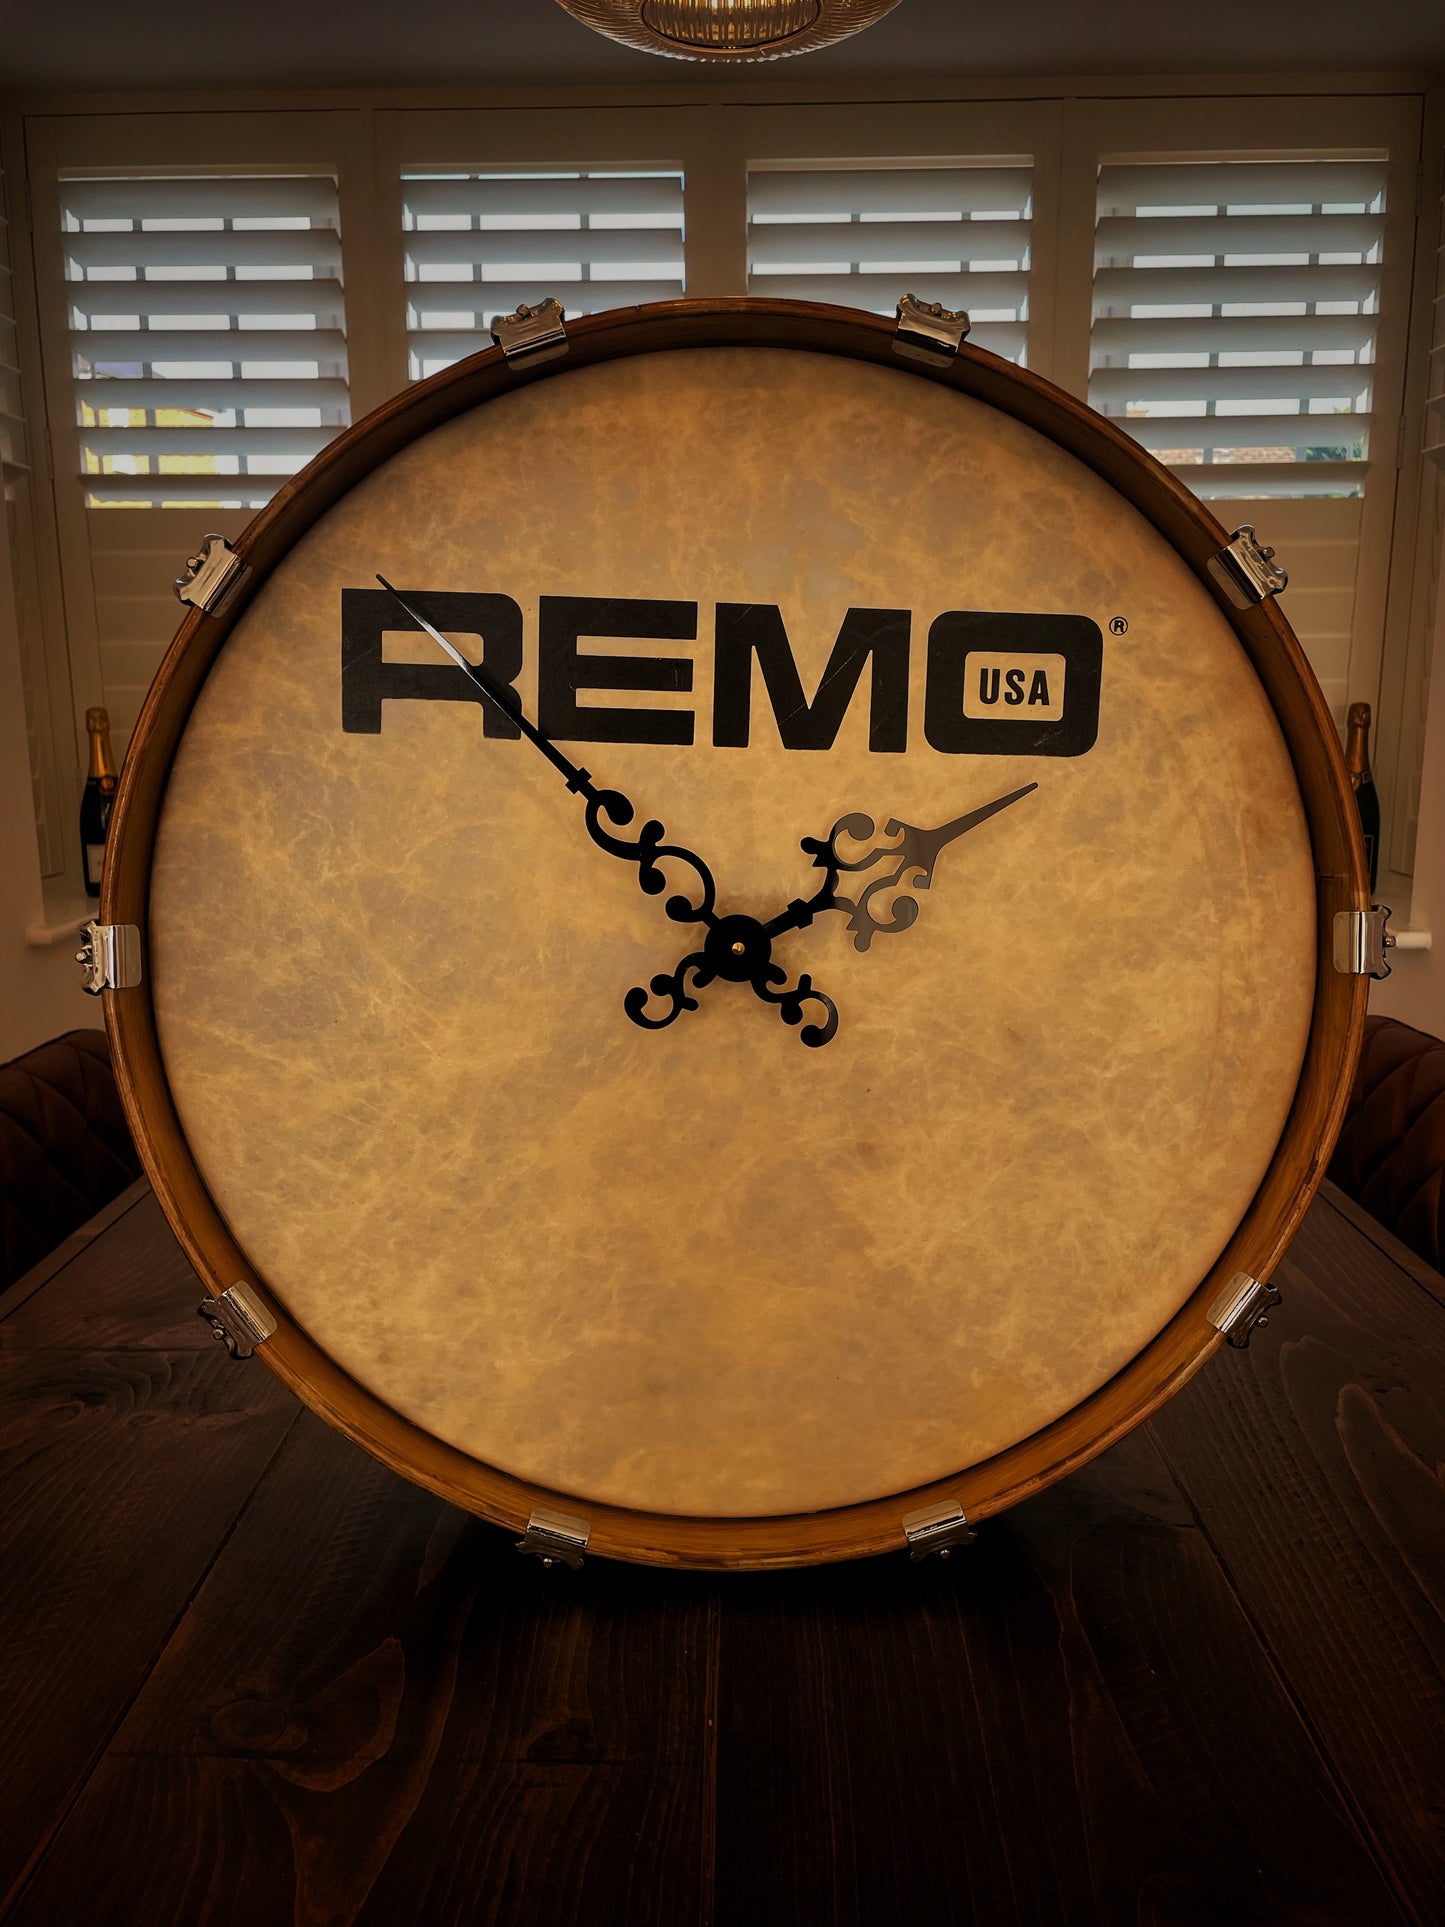 Remo Drum Clock / Wall Feature Mounted 22” Drum Clock / Rustic / Upcycled Drum